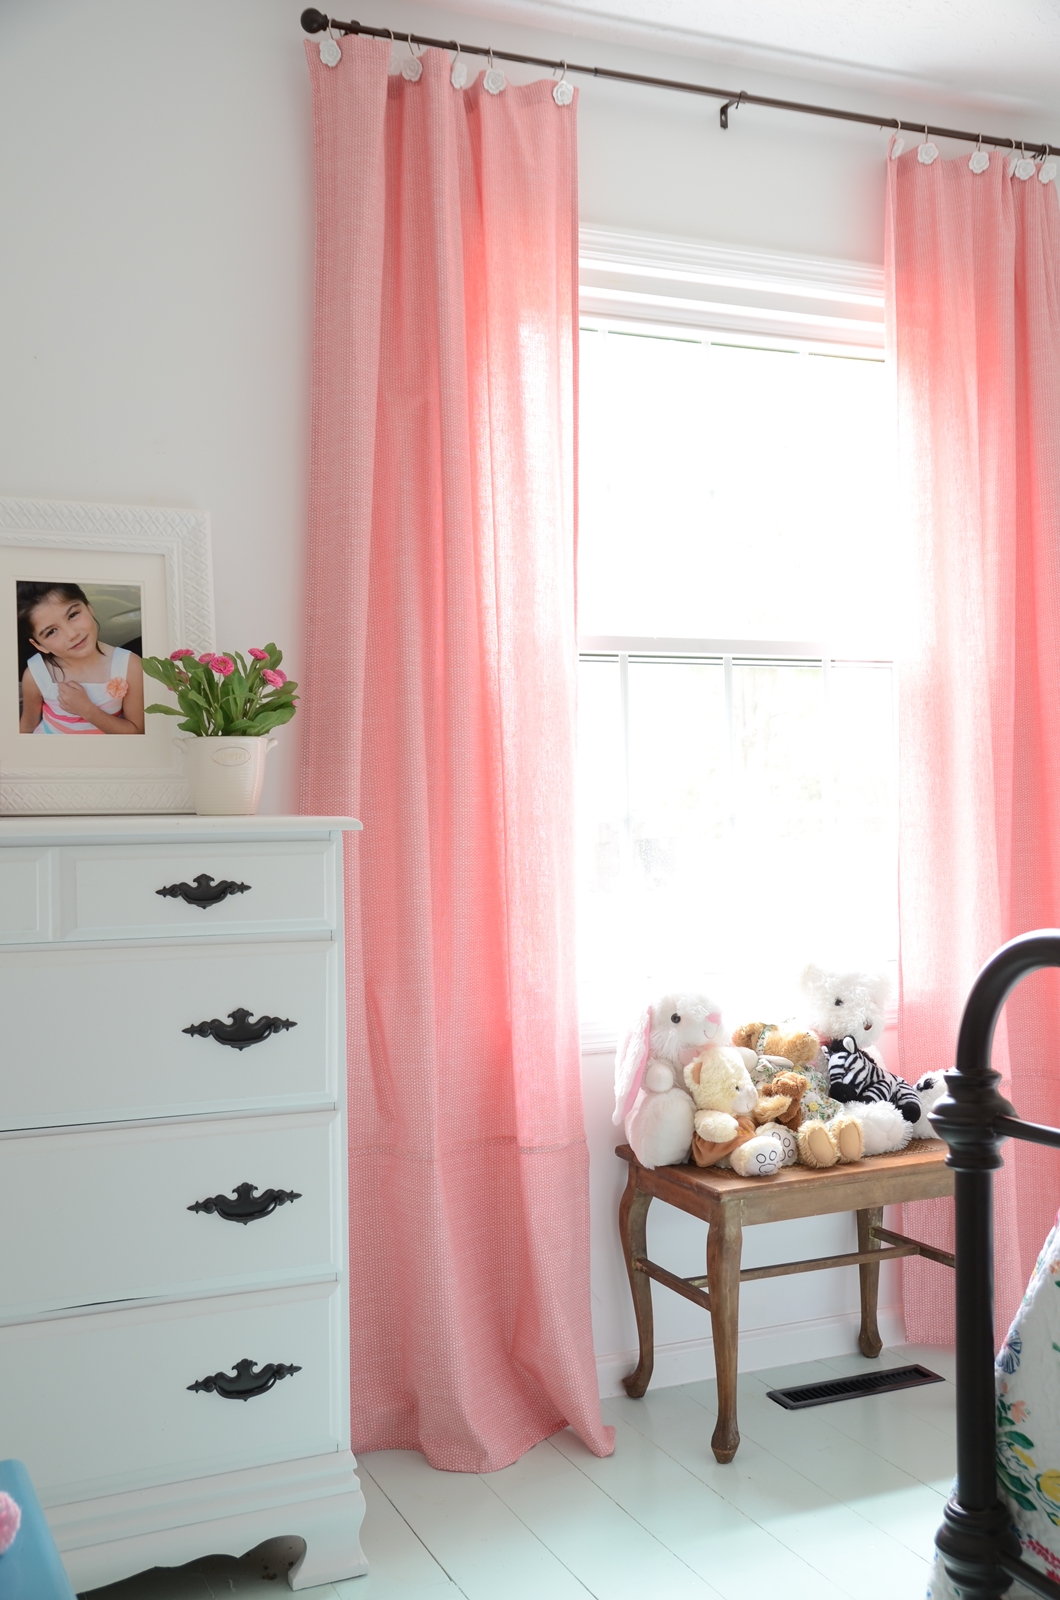 My Inspired Room {for our girl}